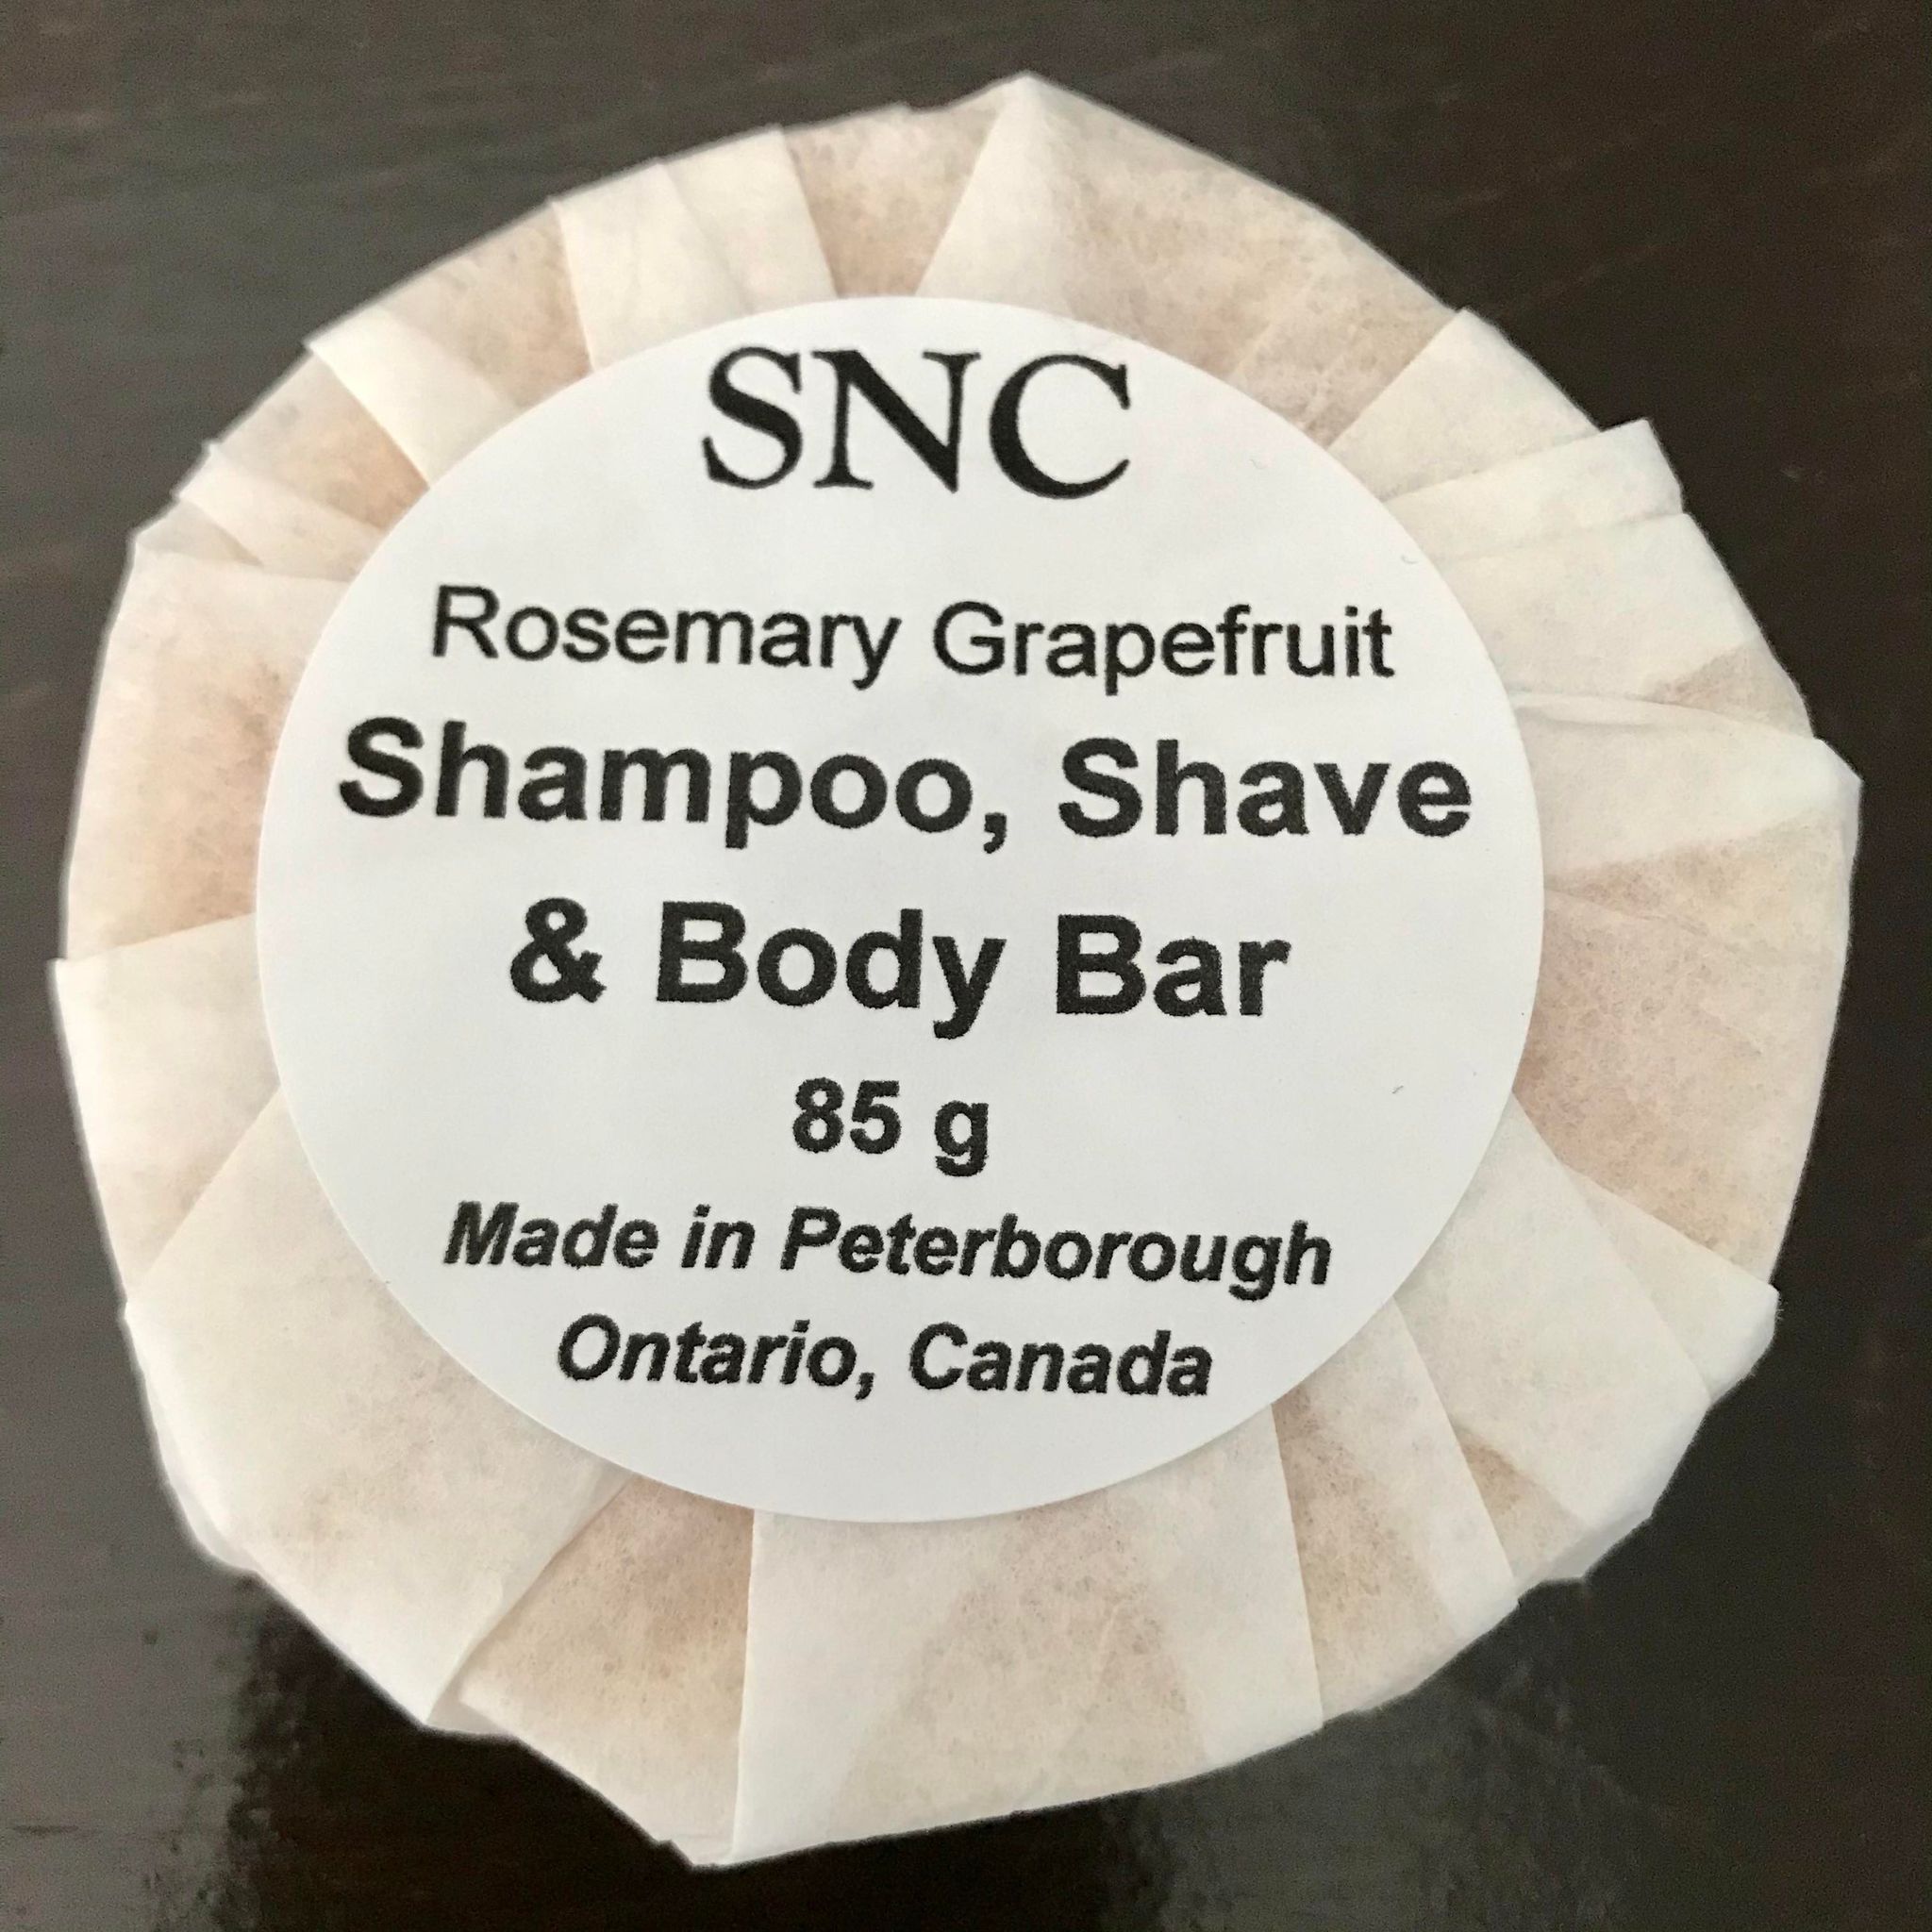 natural rosemary grapefruit essential oil scented round shampoo, shave and body bar made in Canada by Simply Natural Canada